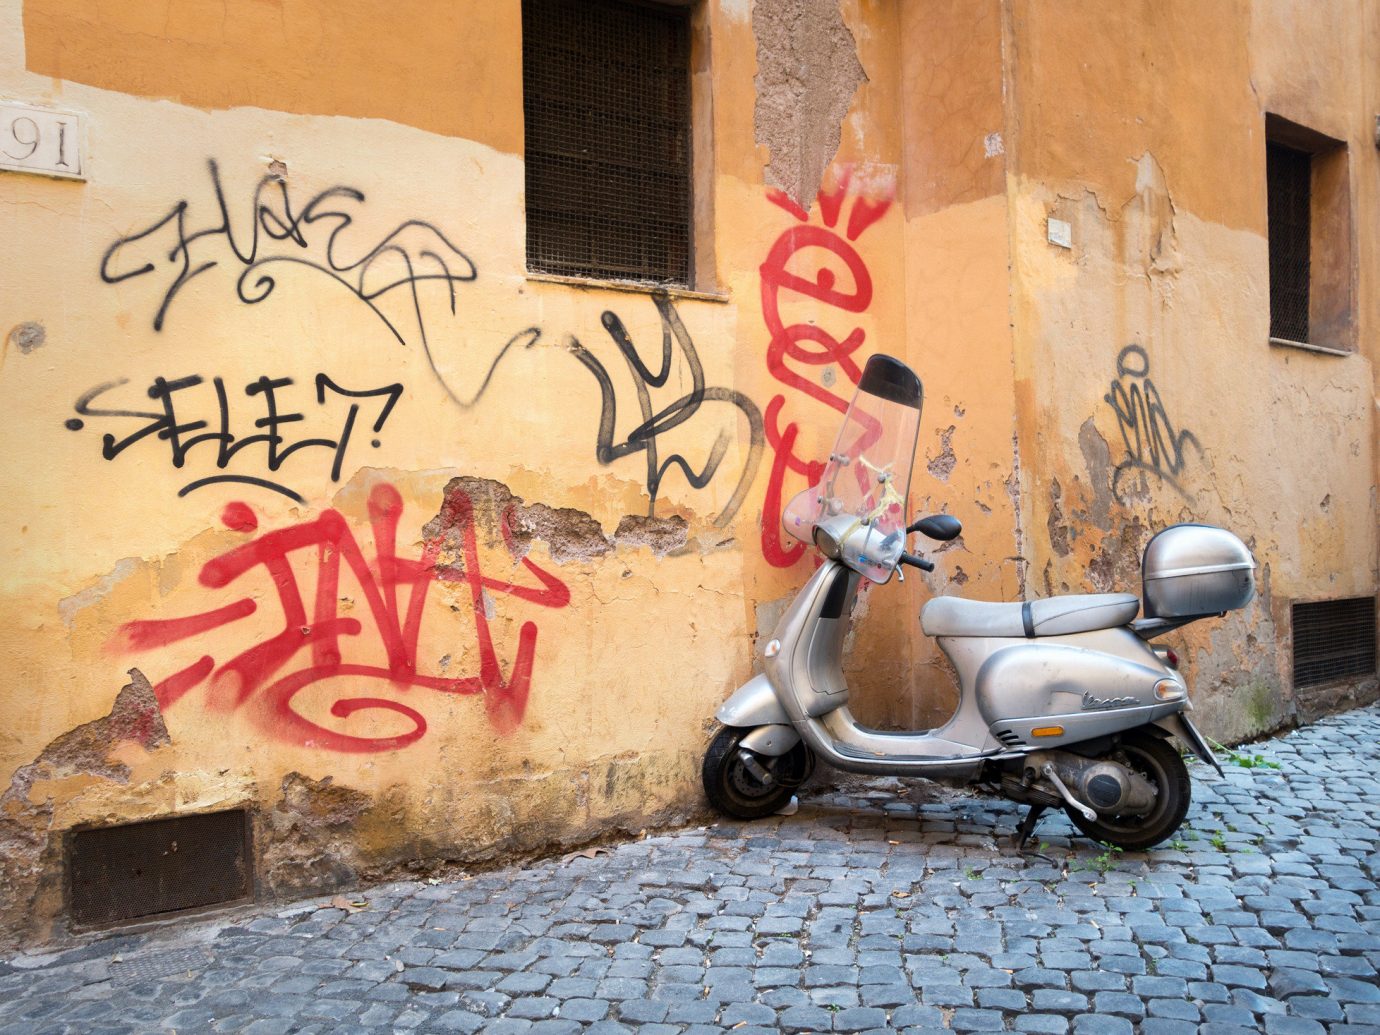 Travel Tips building outdoor graffiti art wall street art parked abstract street vehicle mural road painted scooter